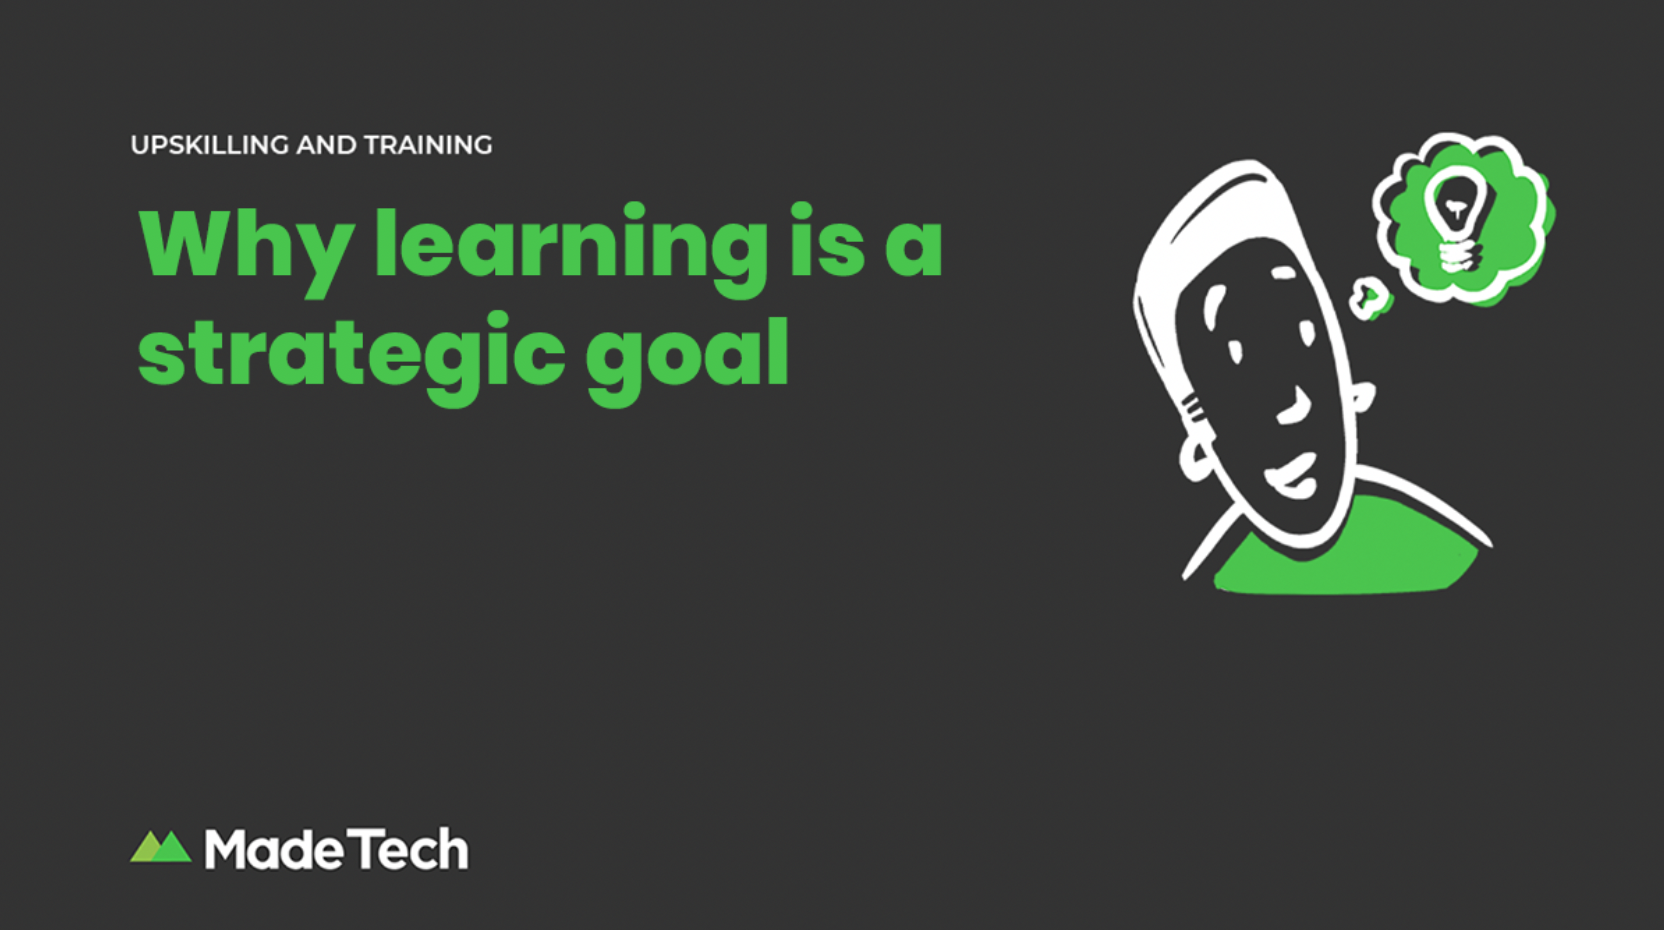 Why learning is a strategic goal